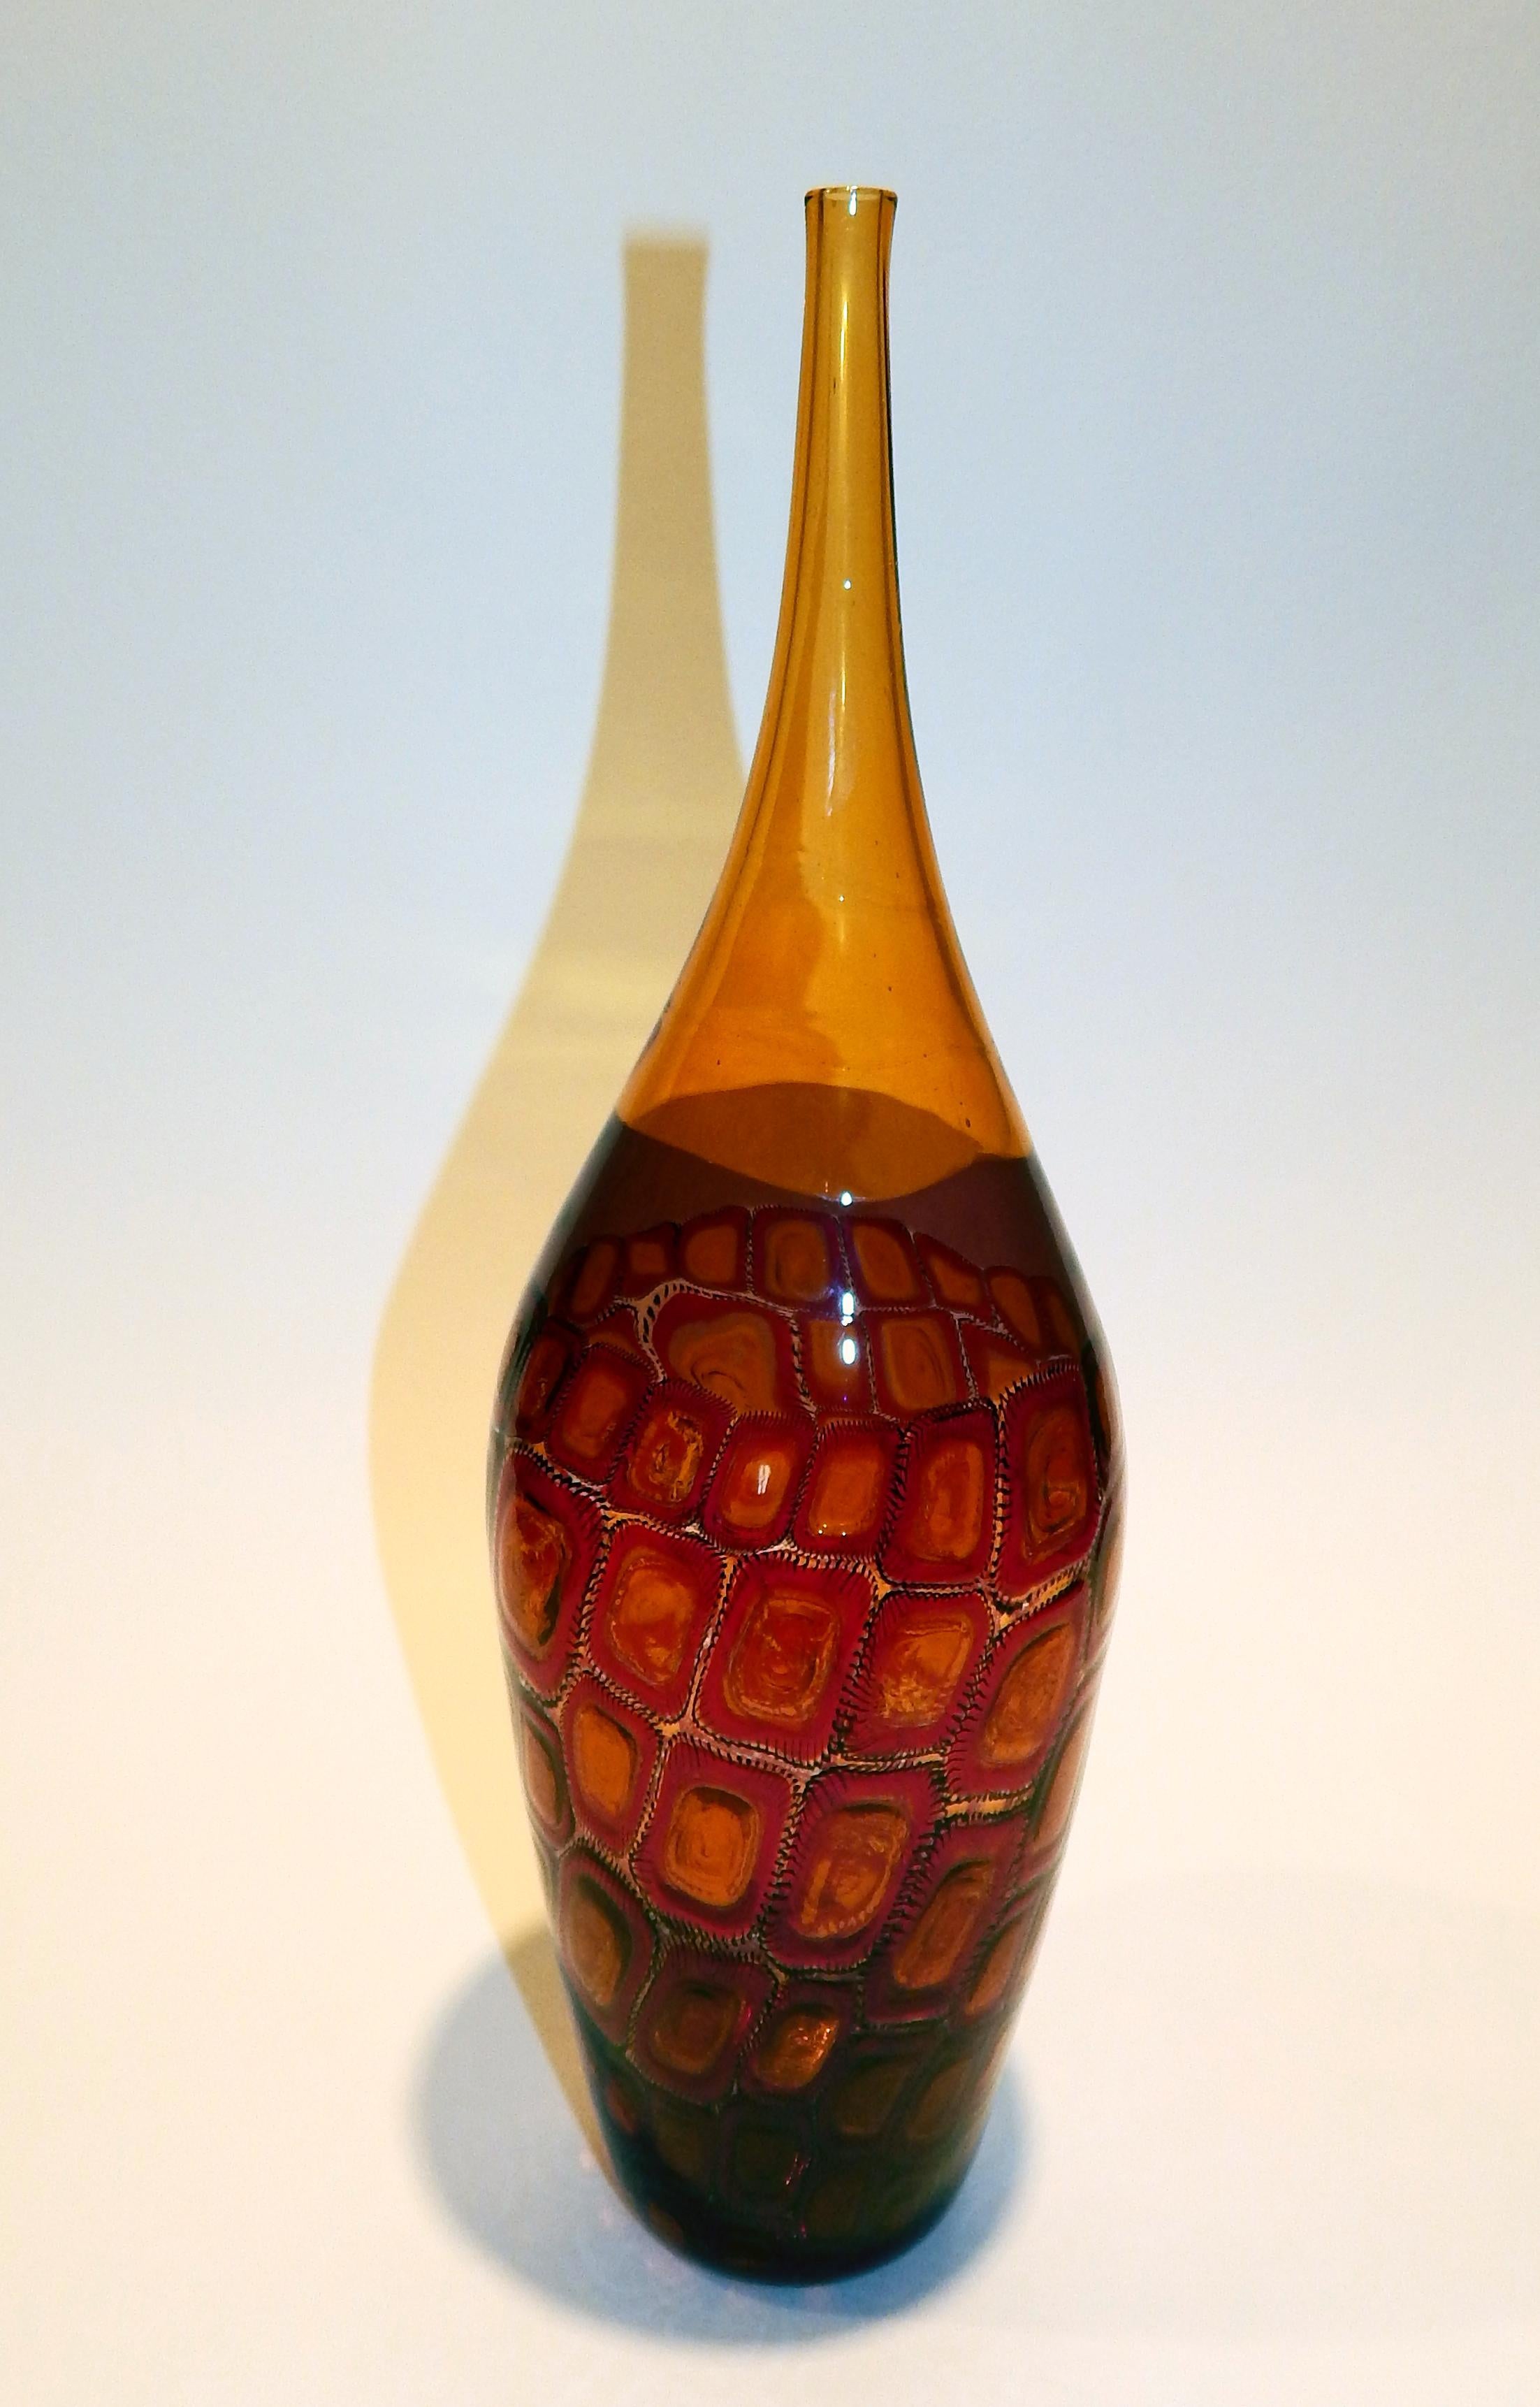 Adriano dalla Valentina Murano Amber Bottle with Mosaica Motif, 2003 In Excellent Condition For Sale In Phoenix, AZ